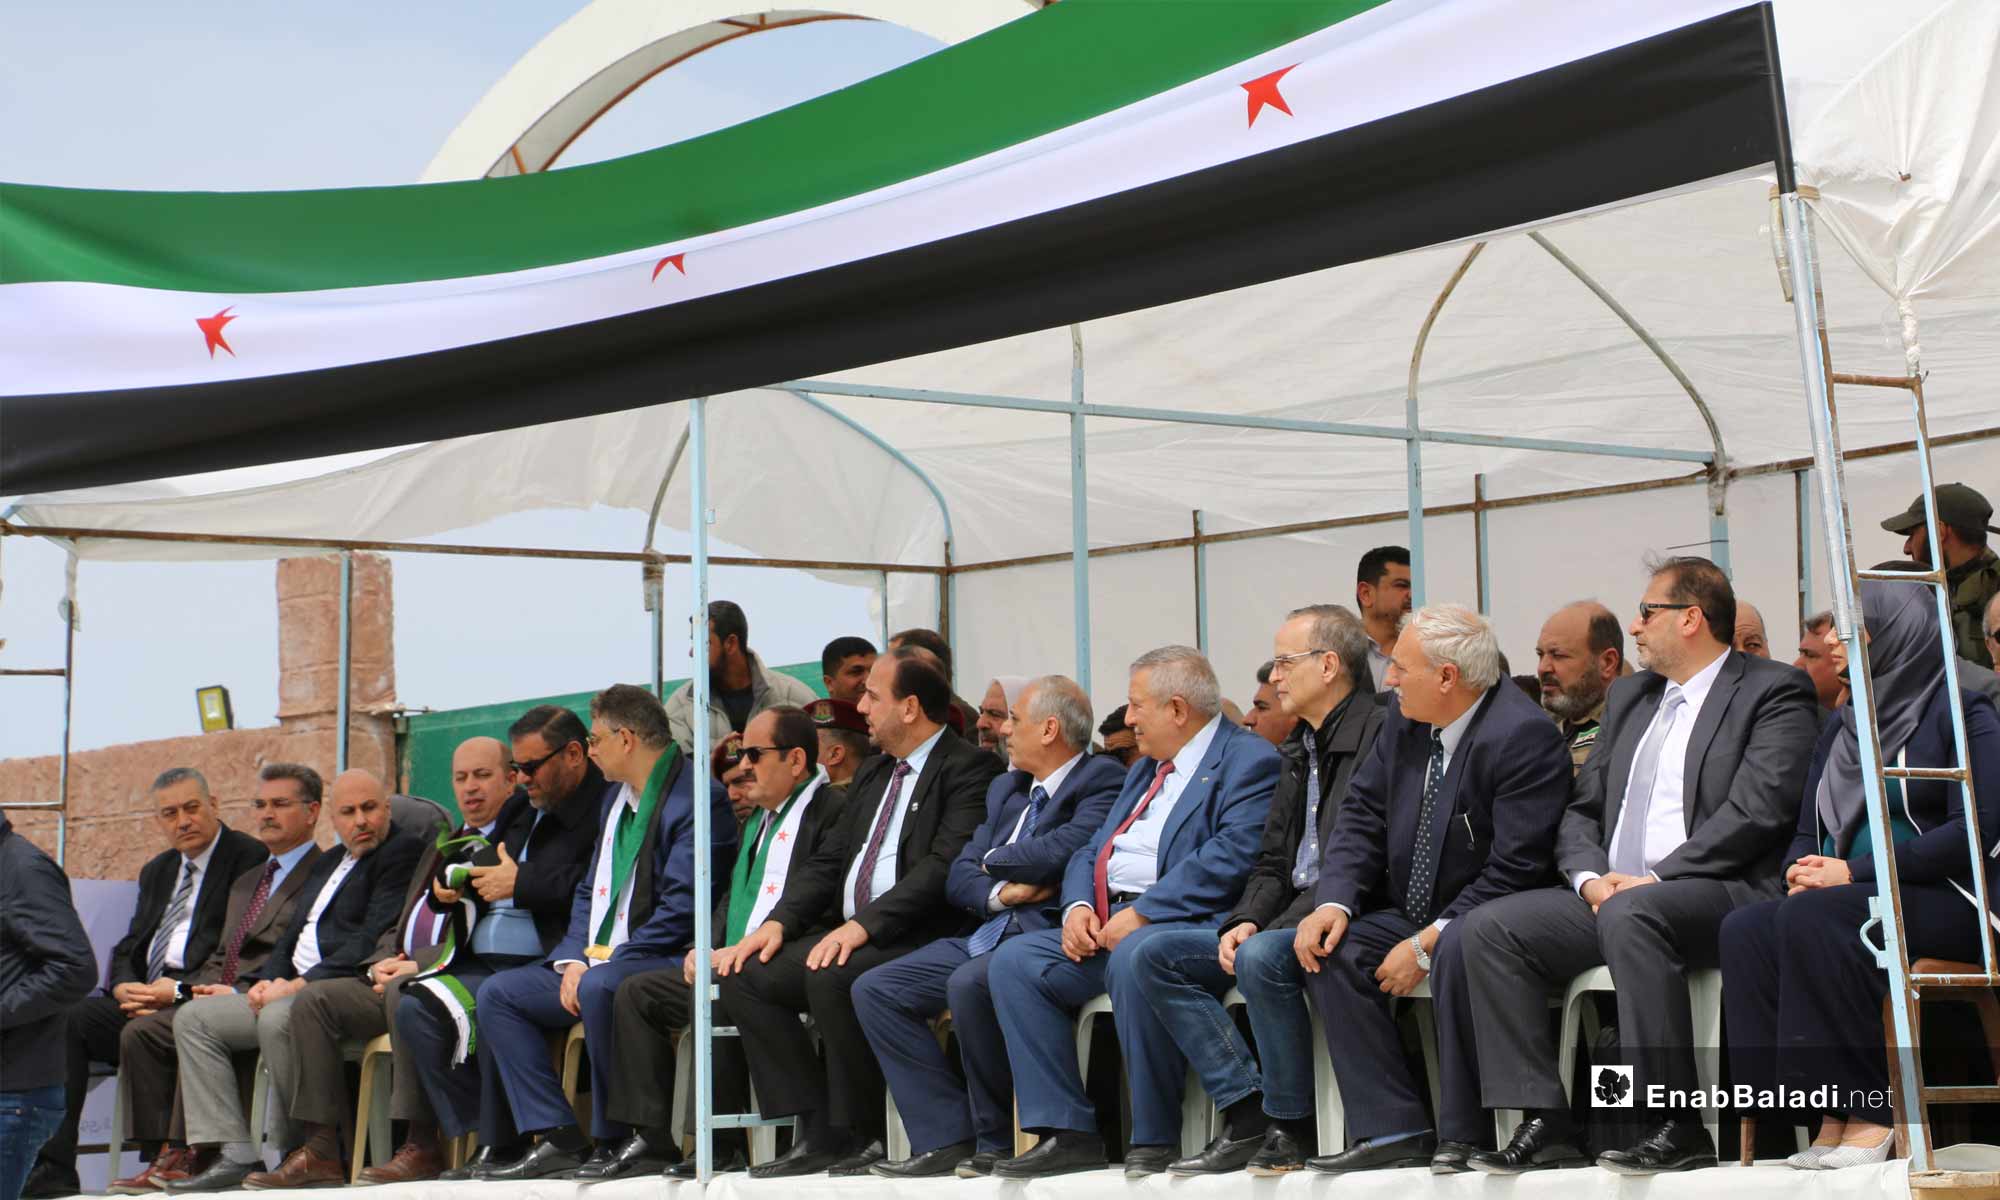 The celebration of opening the first office of the National Coalition for Syrian Revolutionary and Opposition Forces in rural Aleppo – April 24, 2019 (Enab Baladi)